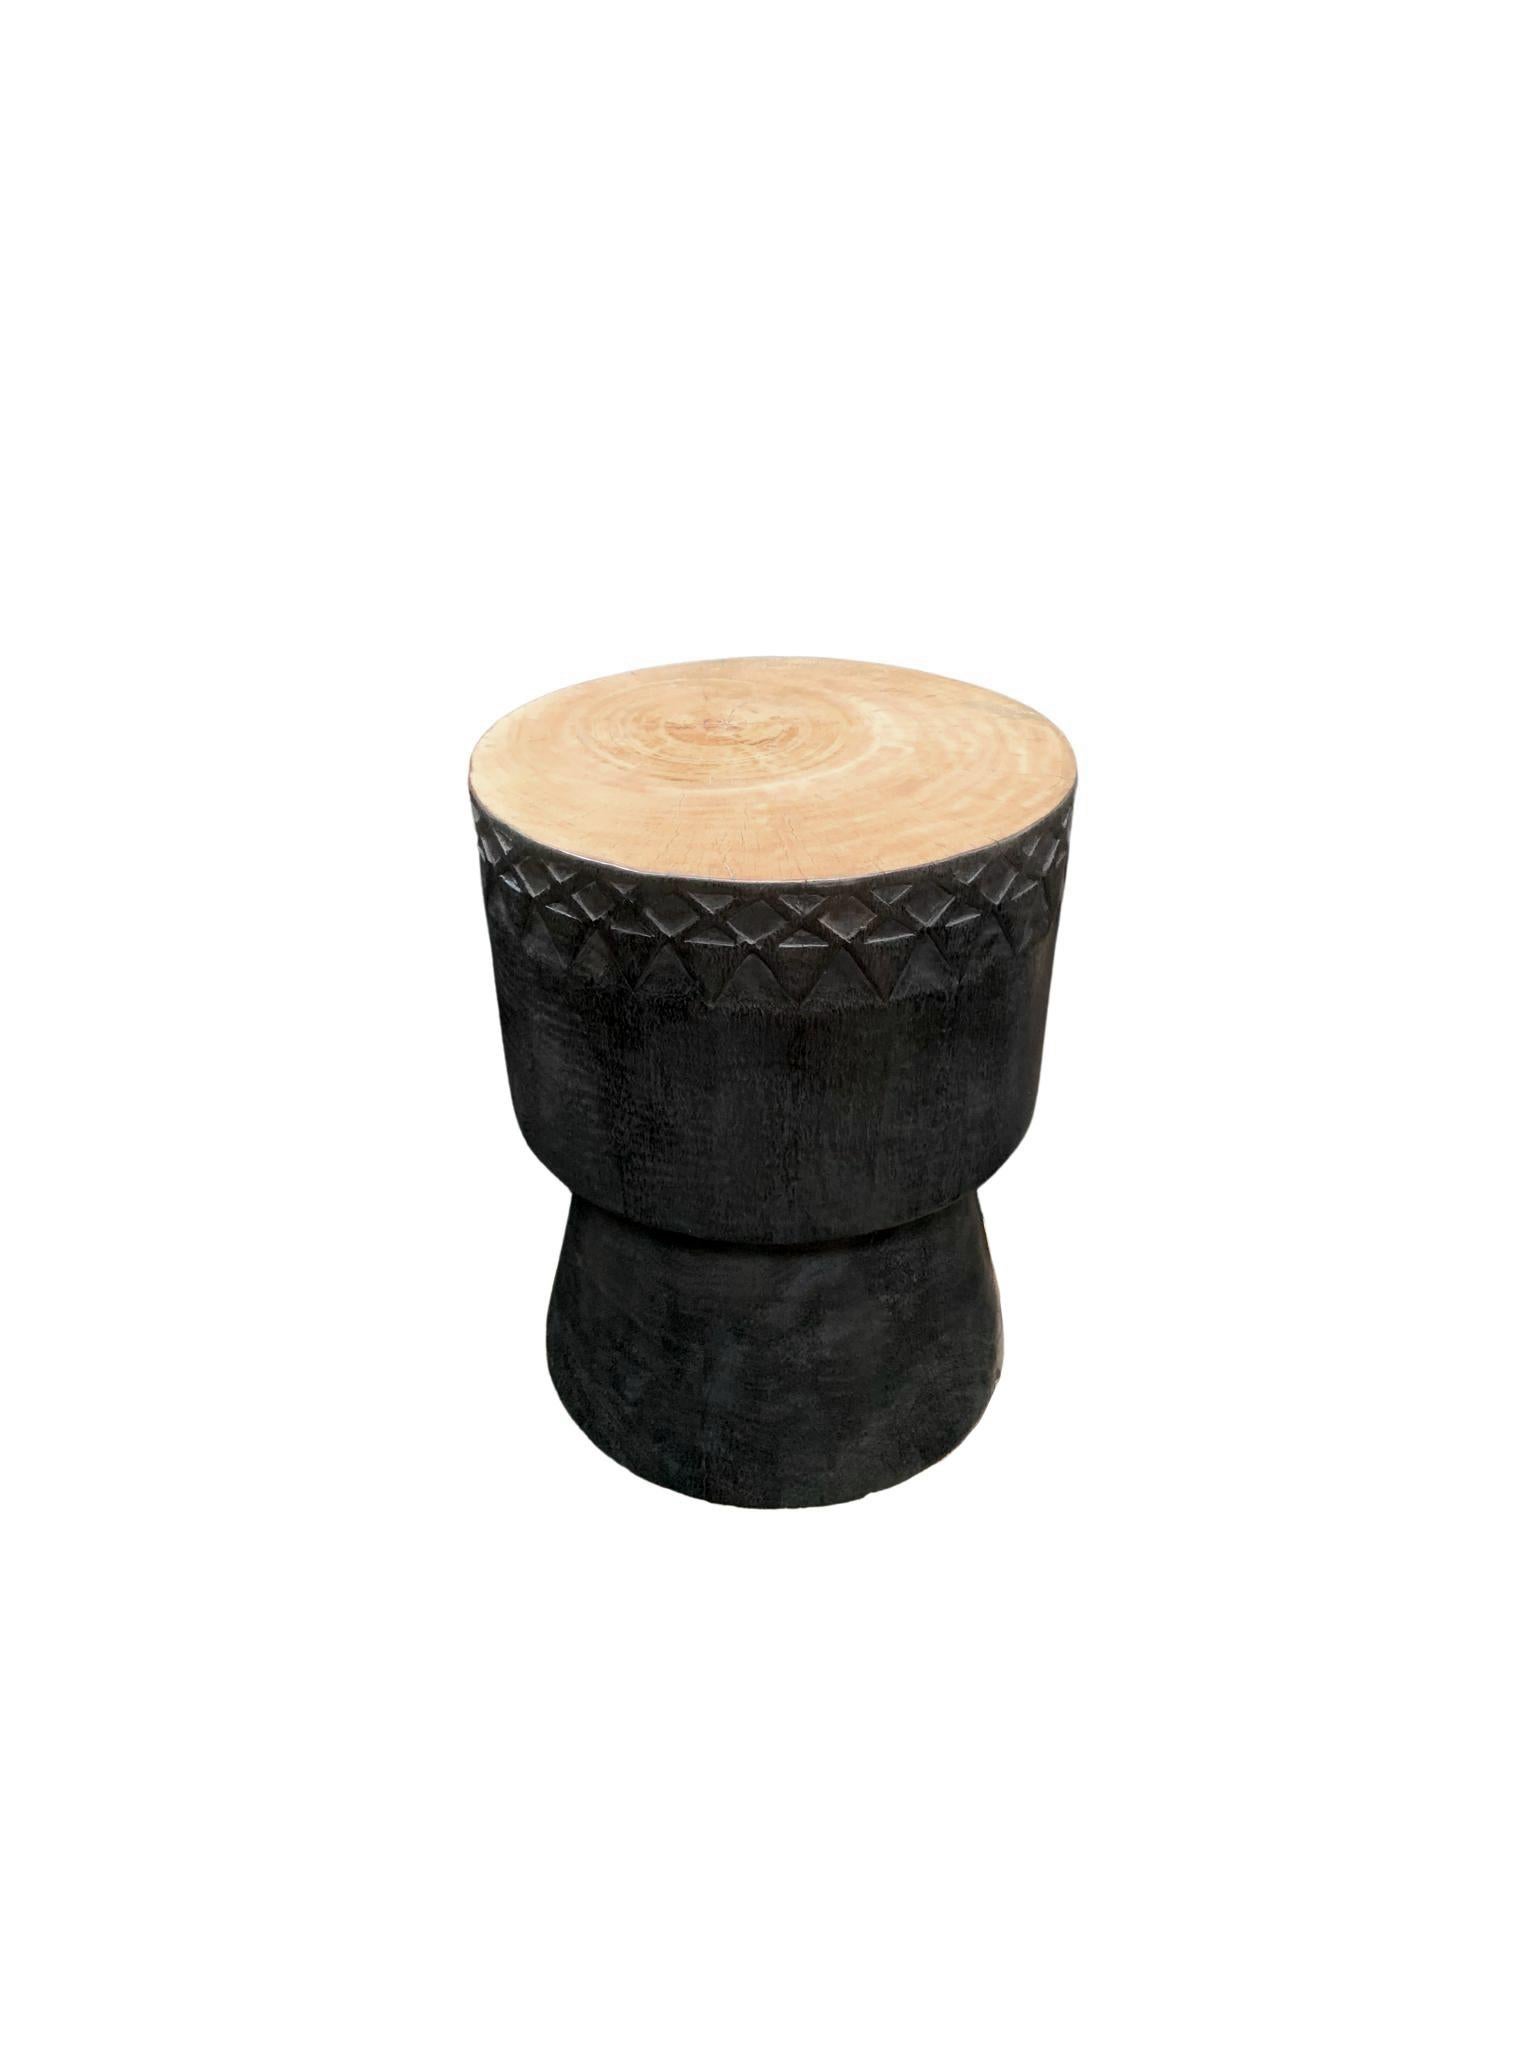 A wonderfully sculptural round side table. Its stark black pigment was achieved through burning the wood three times. Its cream/white pigment on the table top was achieved through a bleaching process creating both a wonderful colour and effect. This